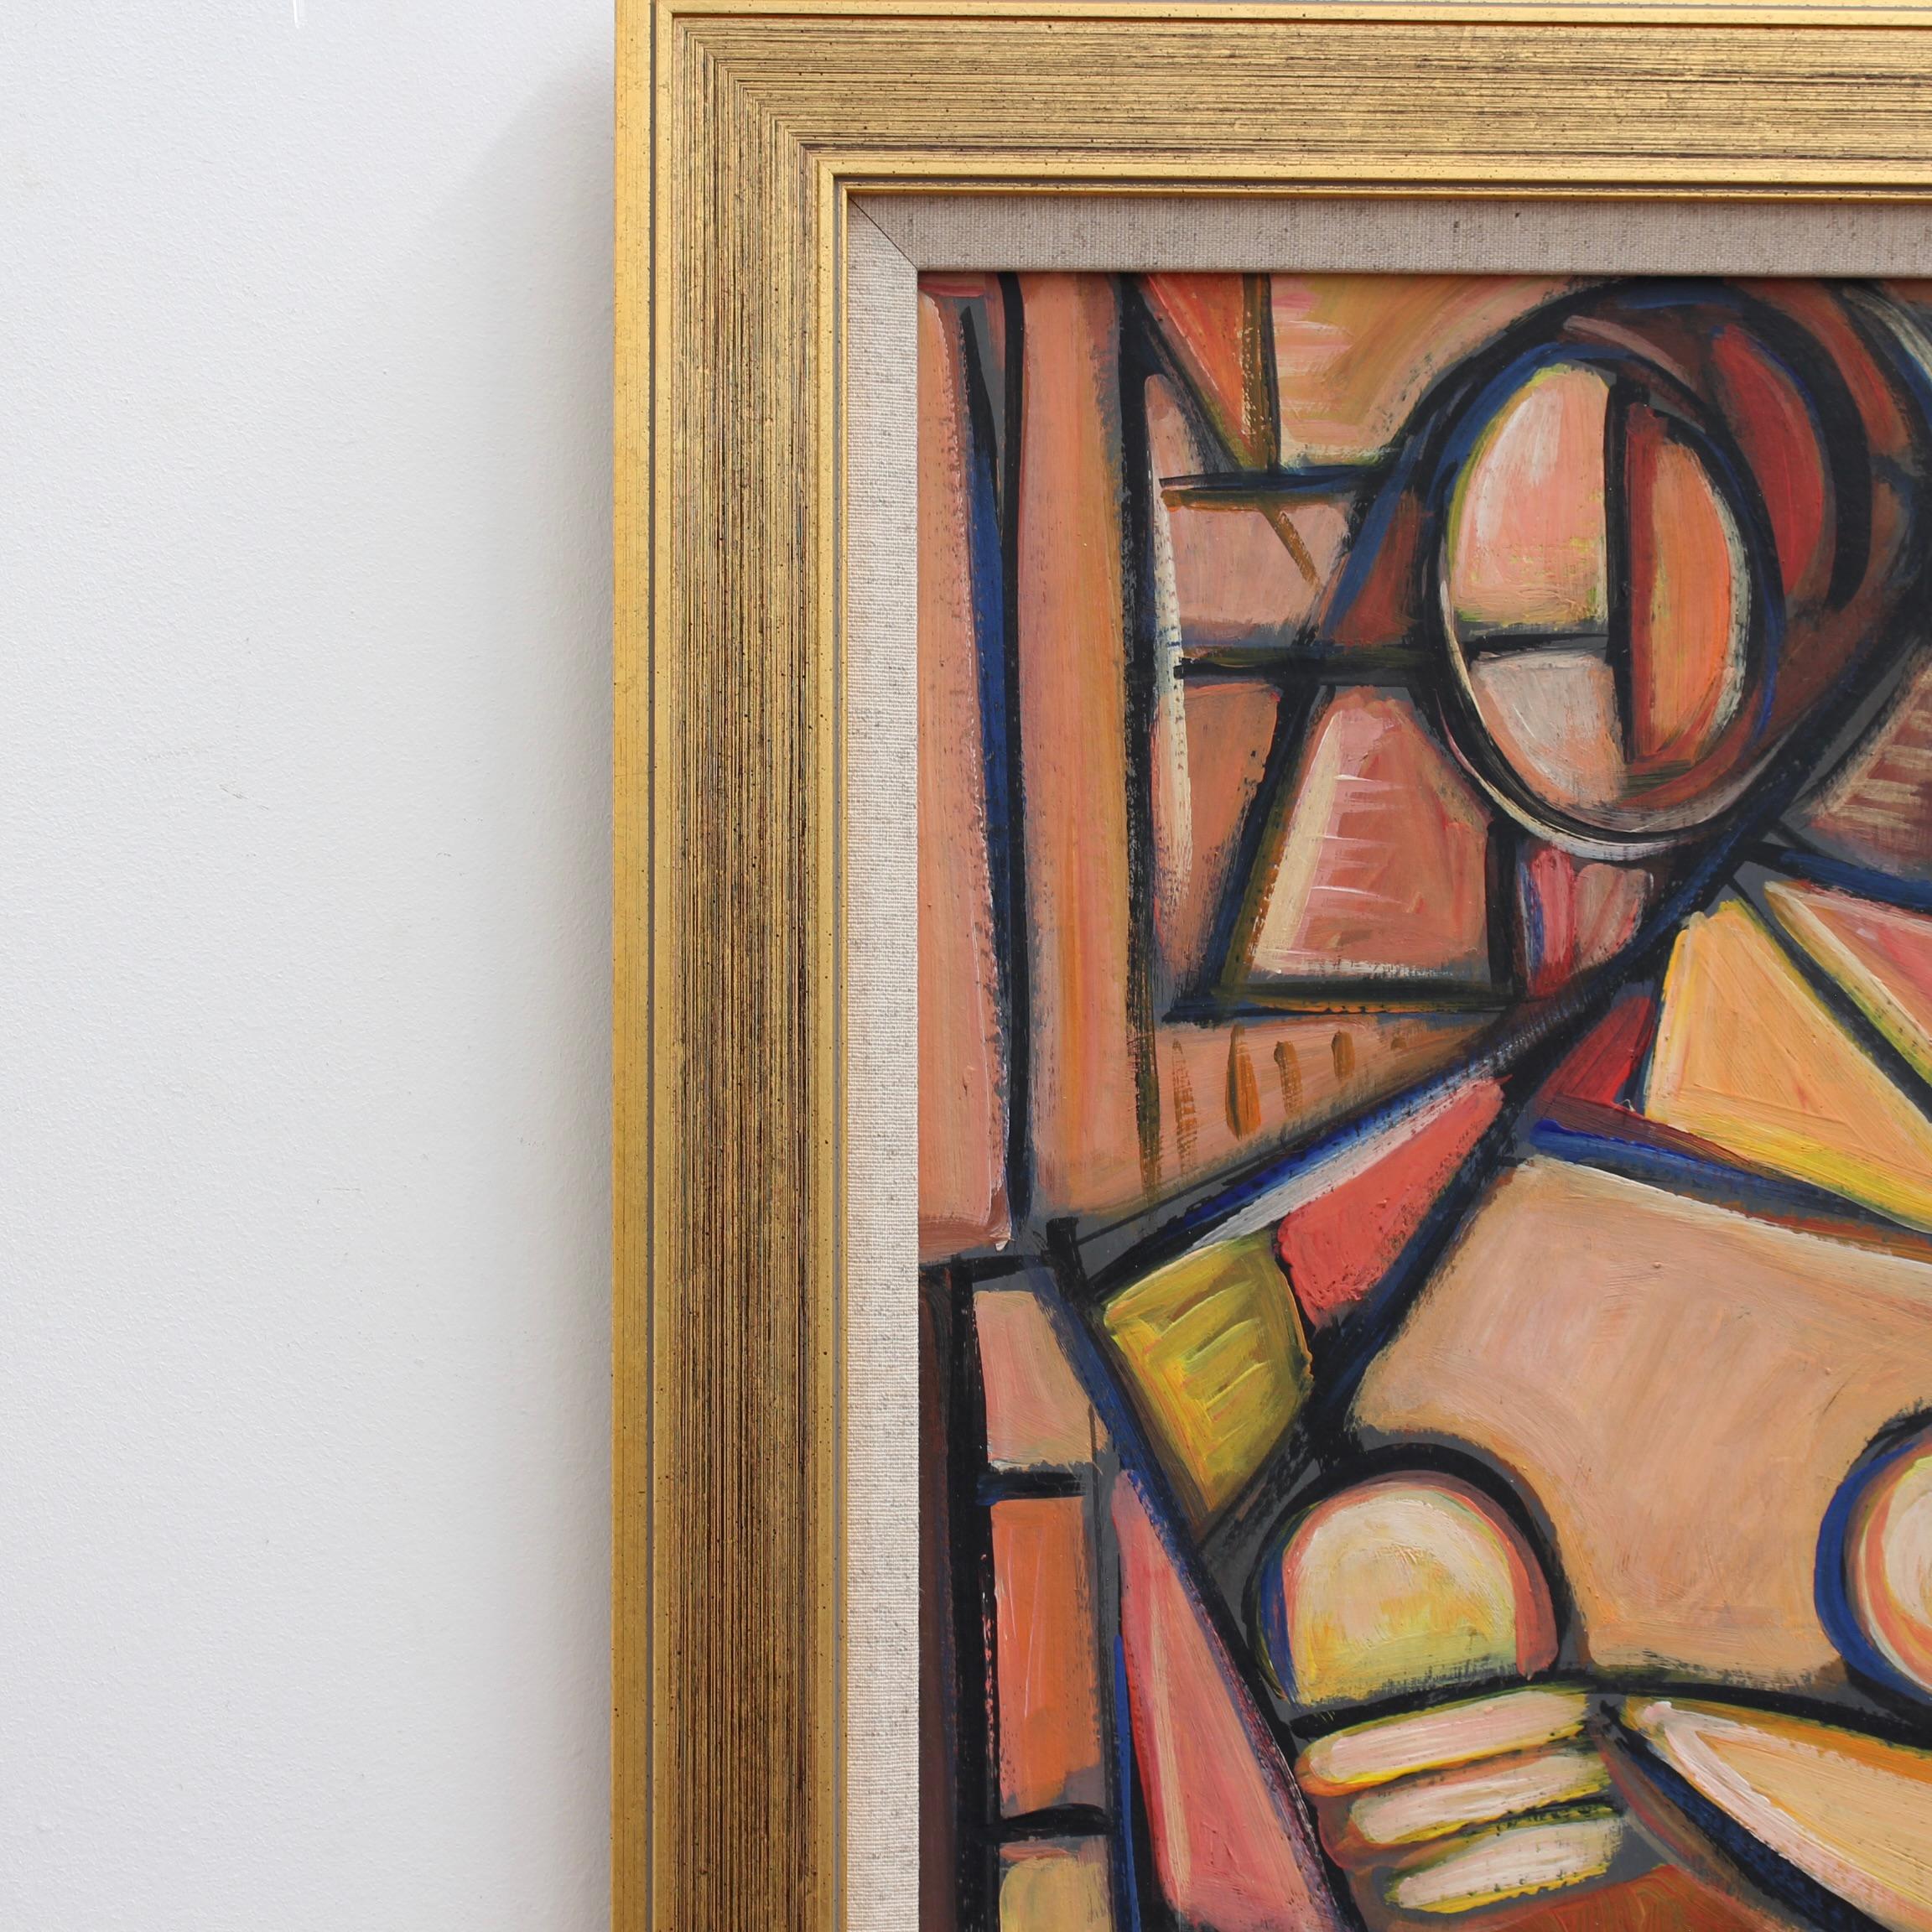 'Portrait of a Cubist Woman', oil on board, by STM (circa 1970s). A captivating painting by an artist with the initials STM. Clearly inspired by cubists Picasso and Braque, the artist uses angles, lines and subdued earth tones to create this